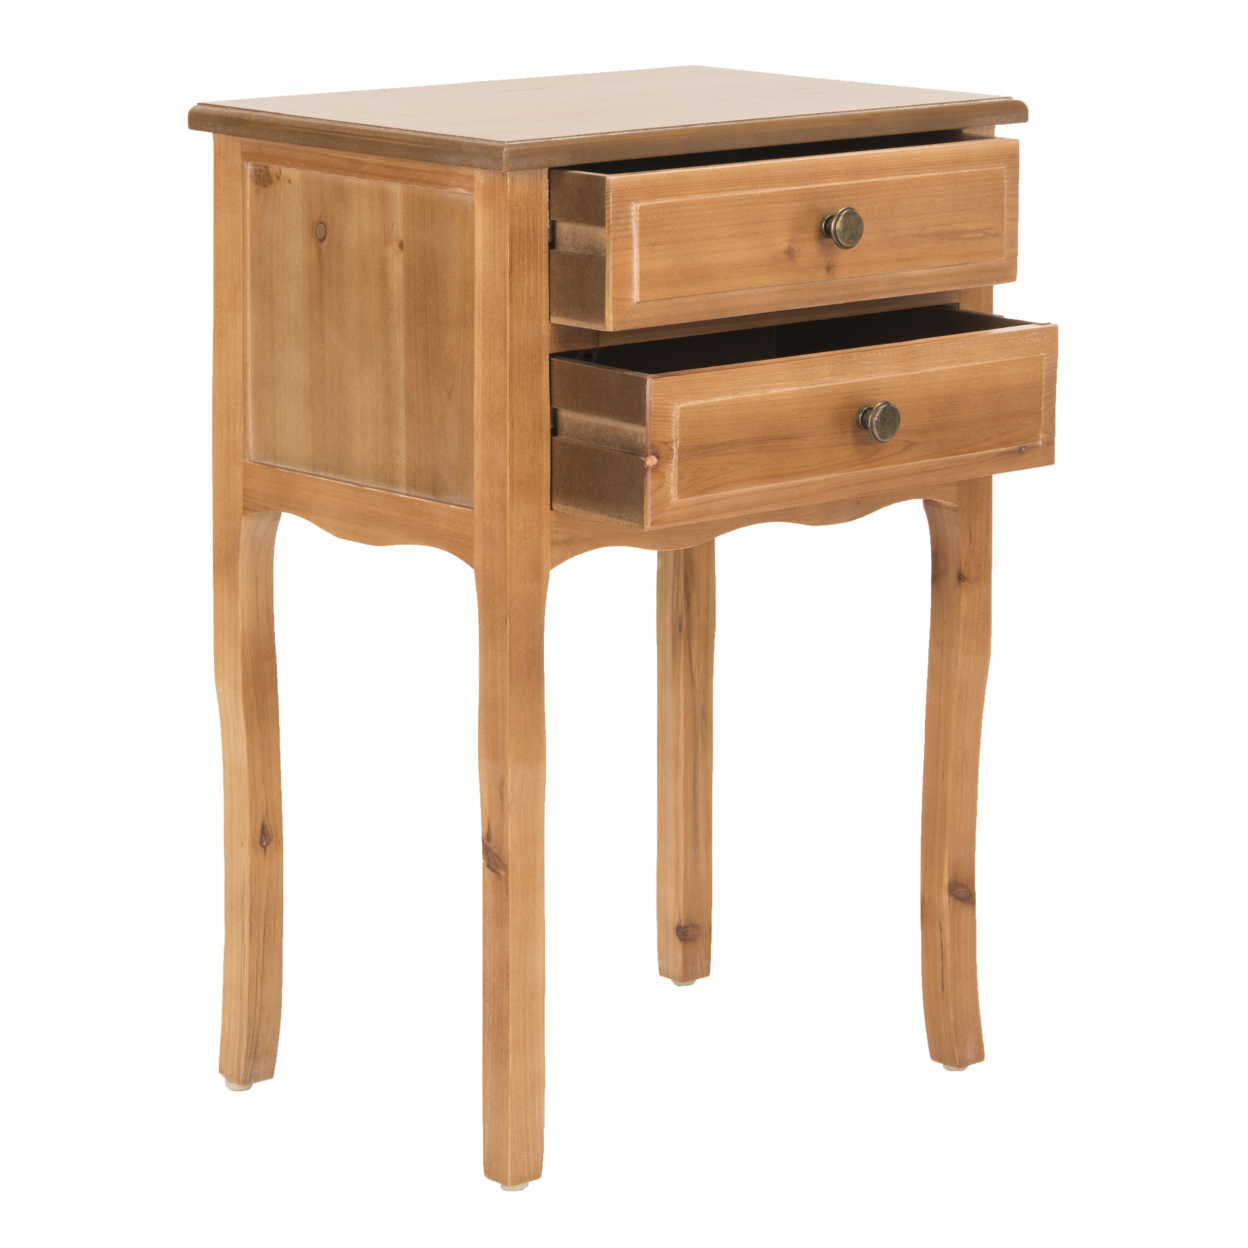 SAFAVIEH Lori End Table With Storage Drawers Red Maple